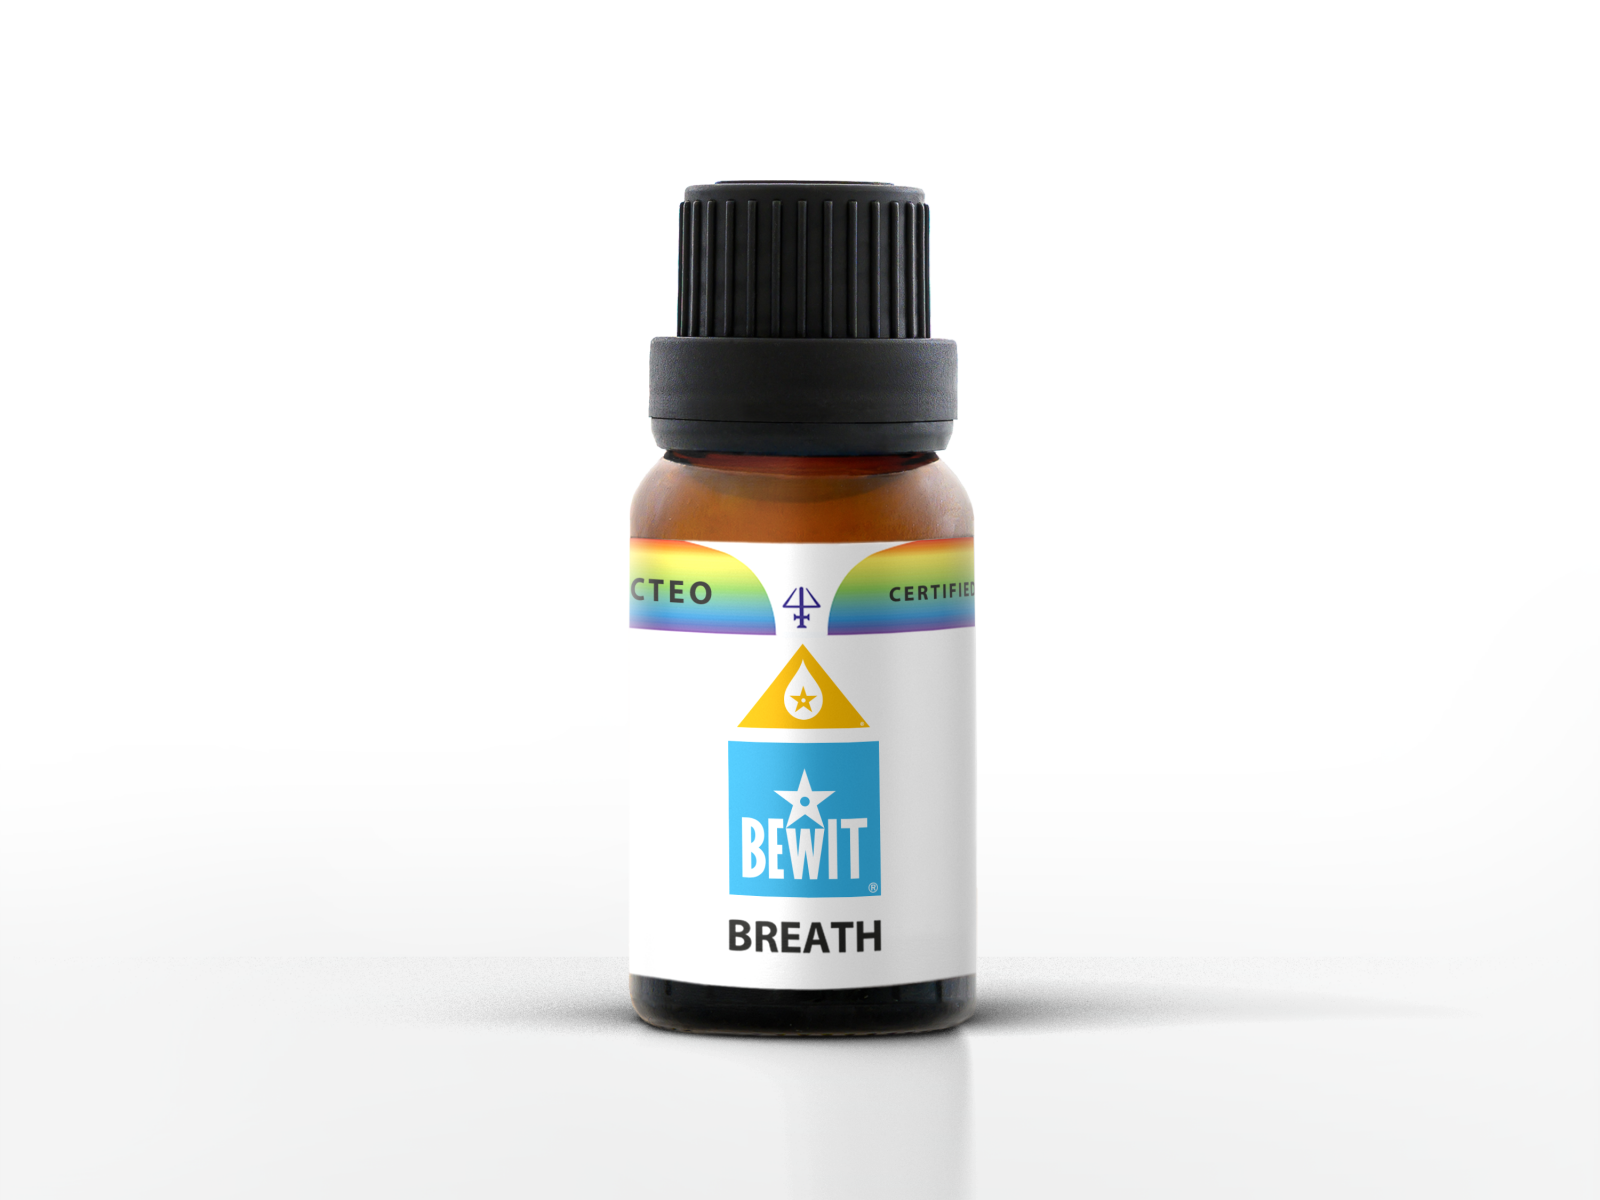 BEWIT BREATH - This is a blend of pure essential oils